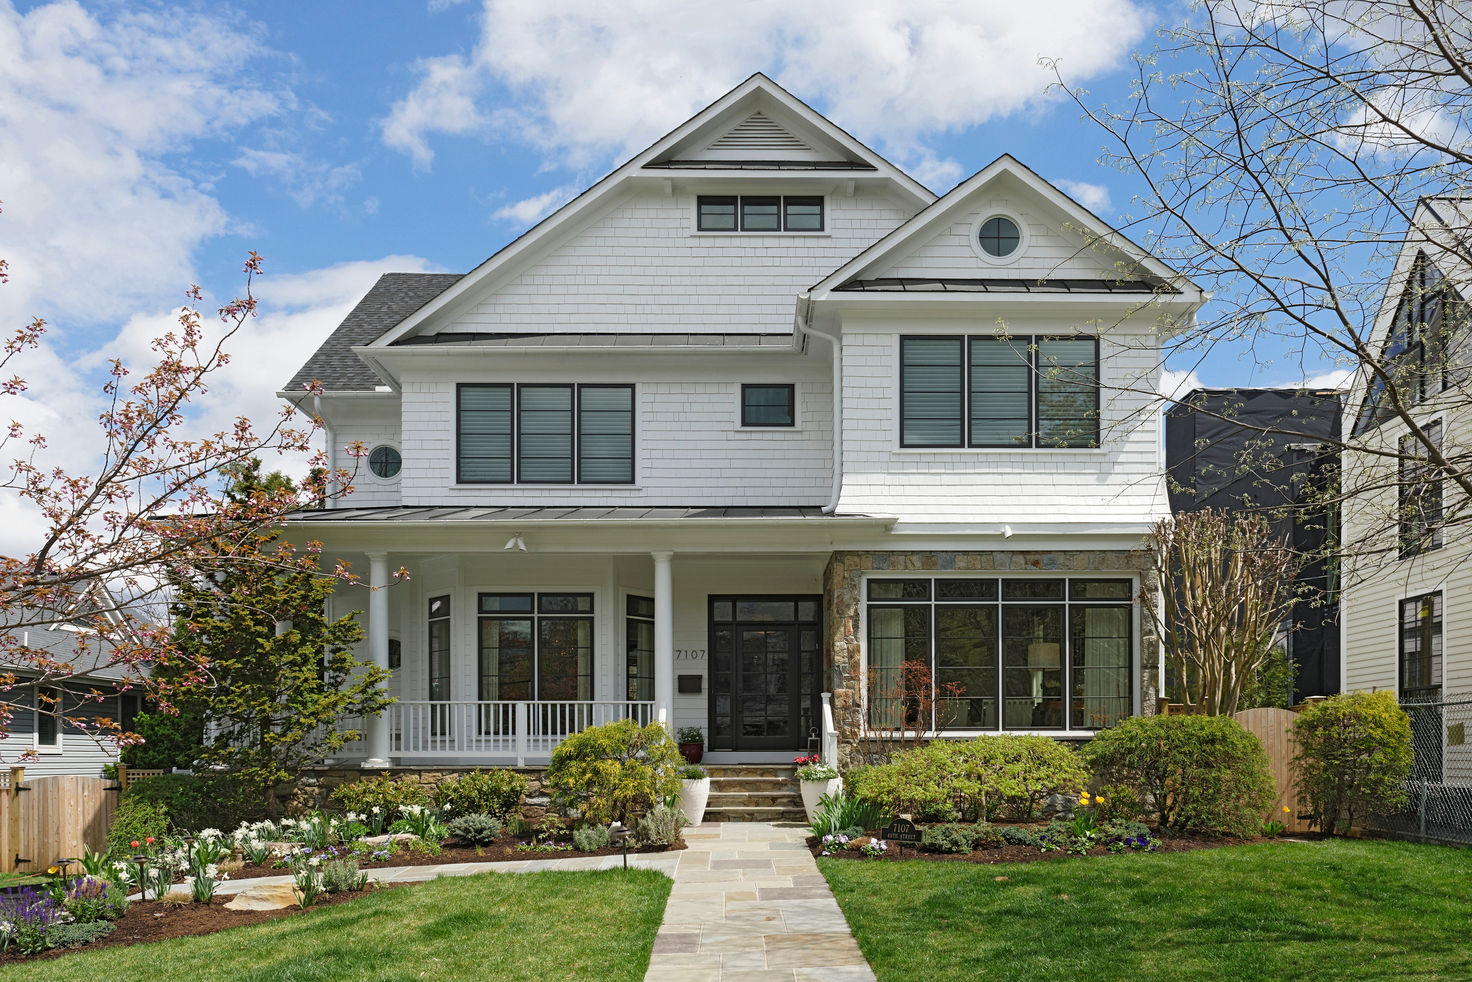 Fire Restoration in Chevy Chase Creates Opportunity for Whole House Renovation, BOWA - Design Build Experts BOWA - Design Build Experts Dom jednorodzinny